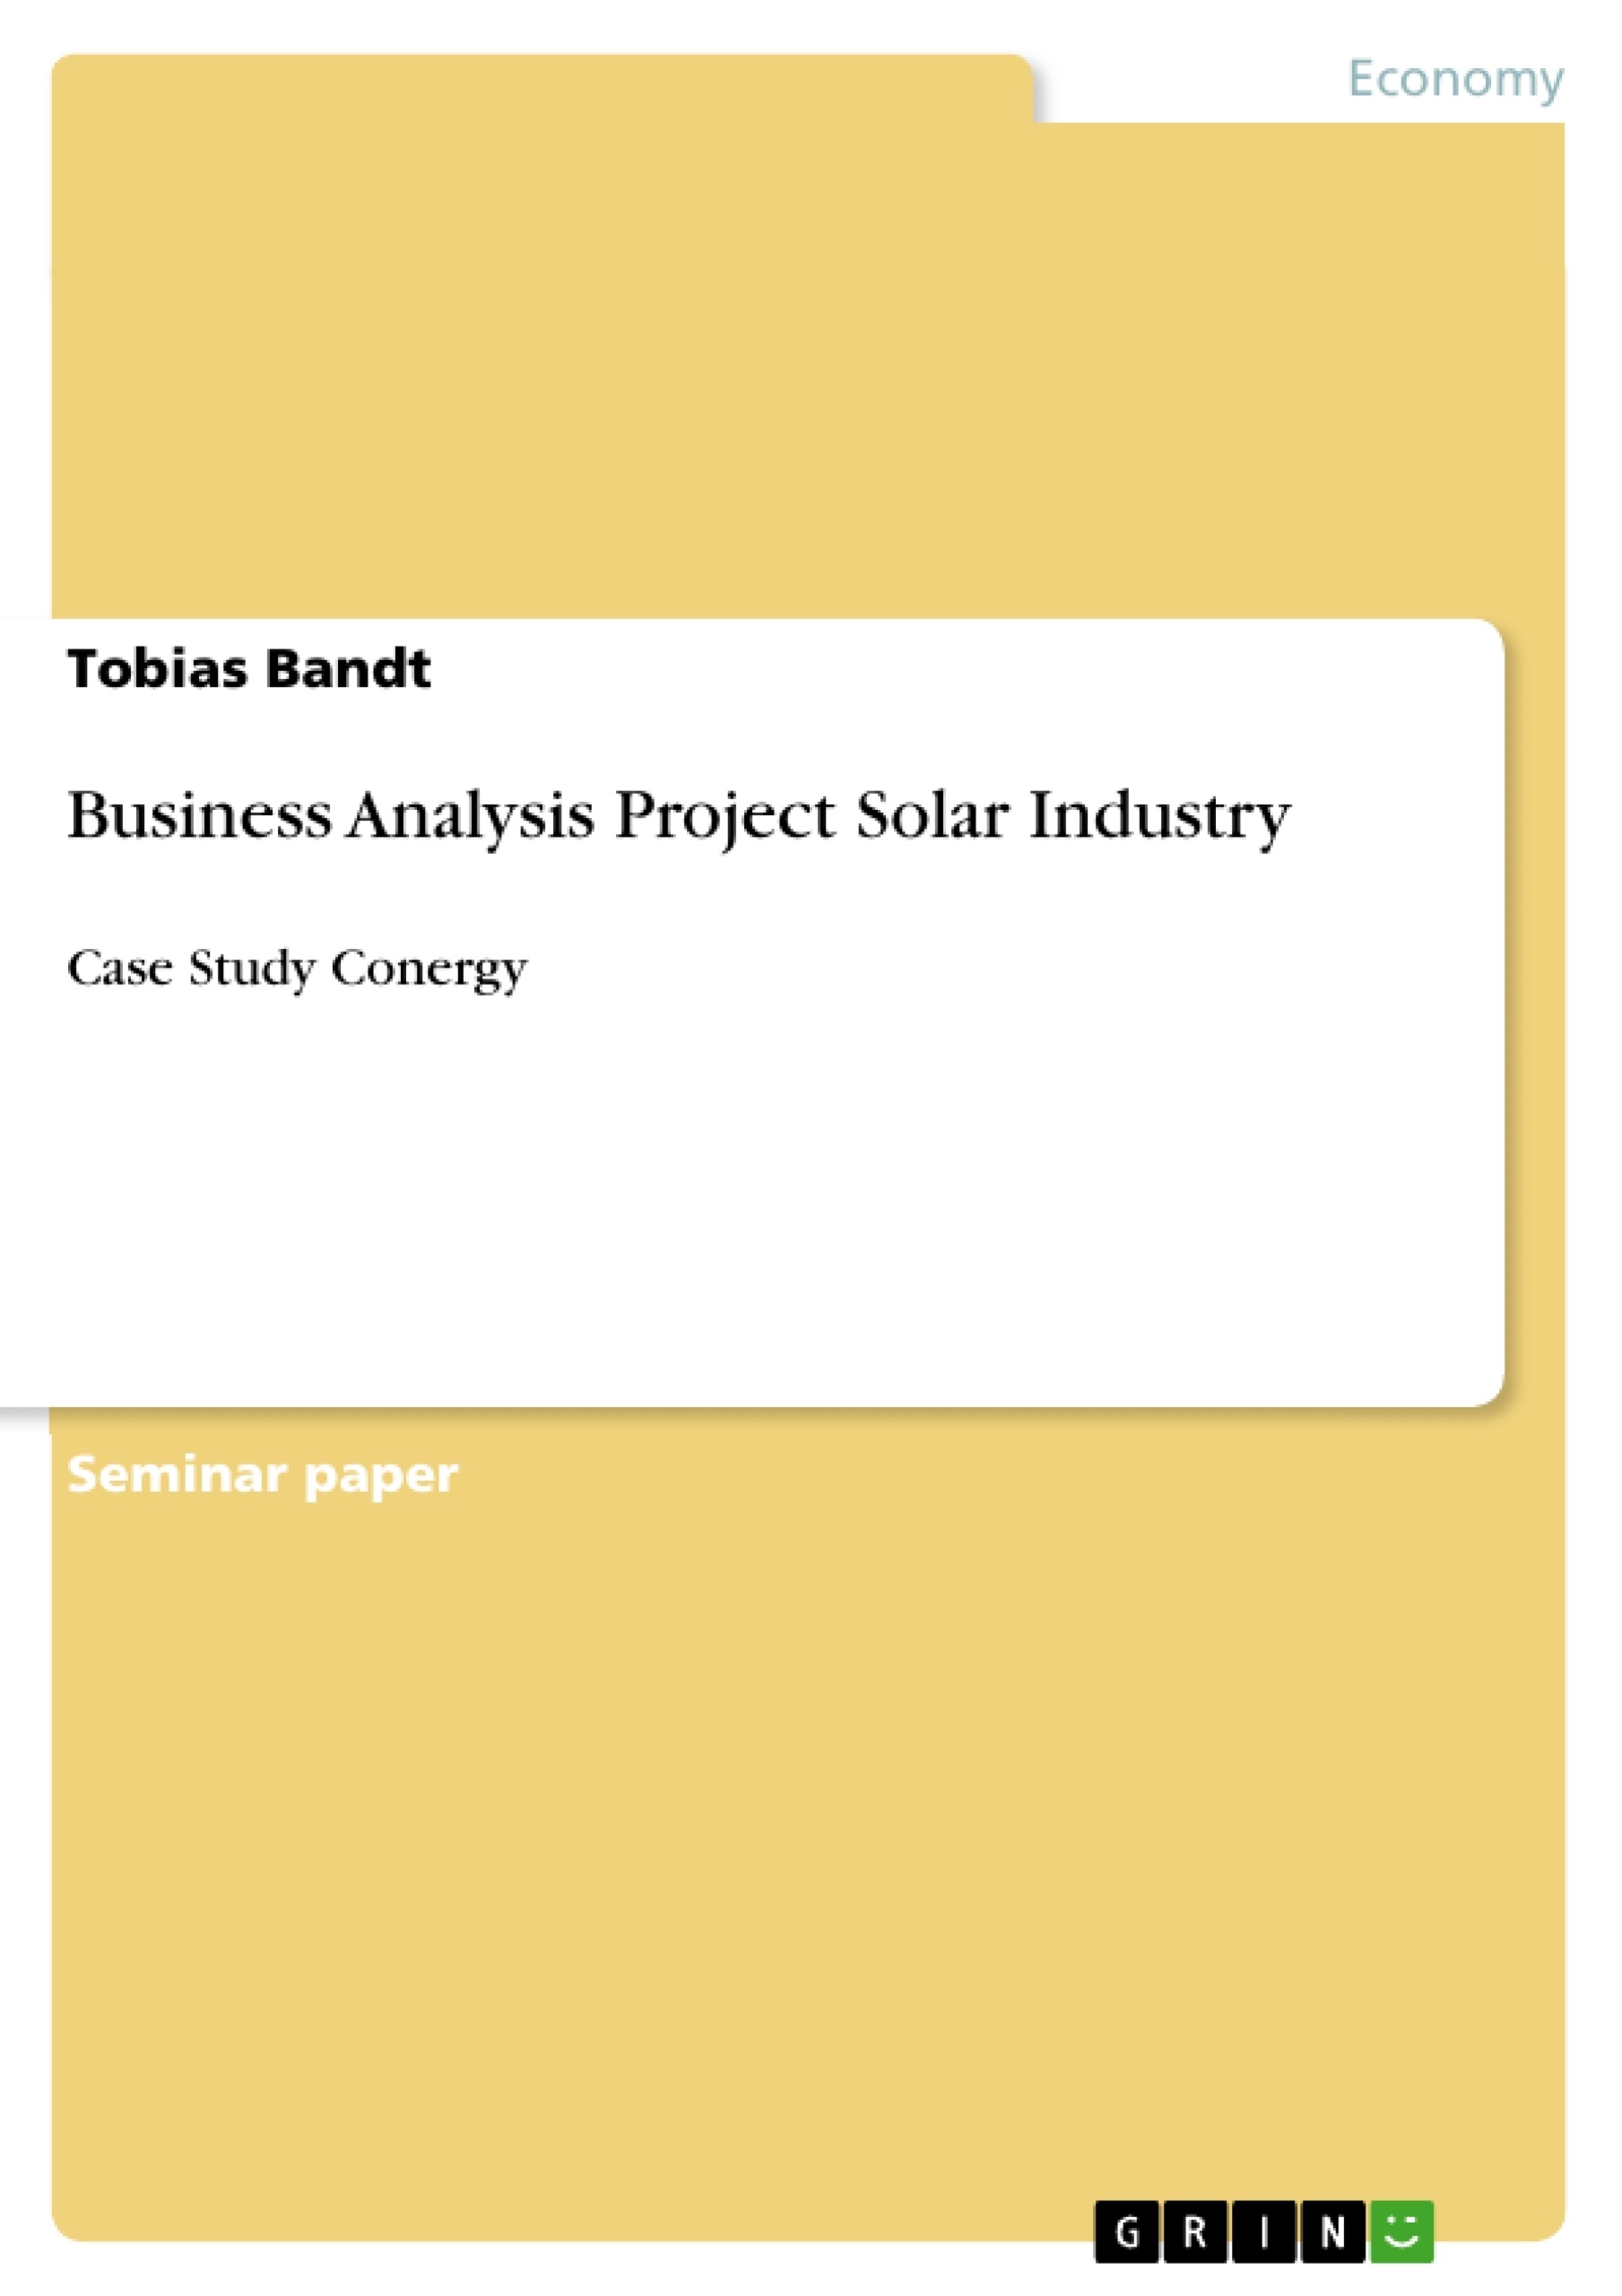 Title: Business Analysis Project Solar Industry 